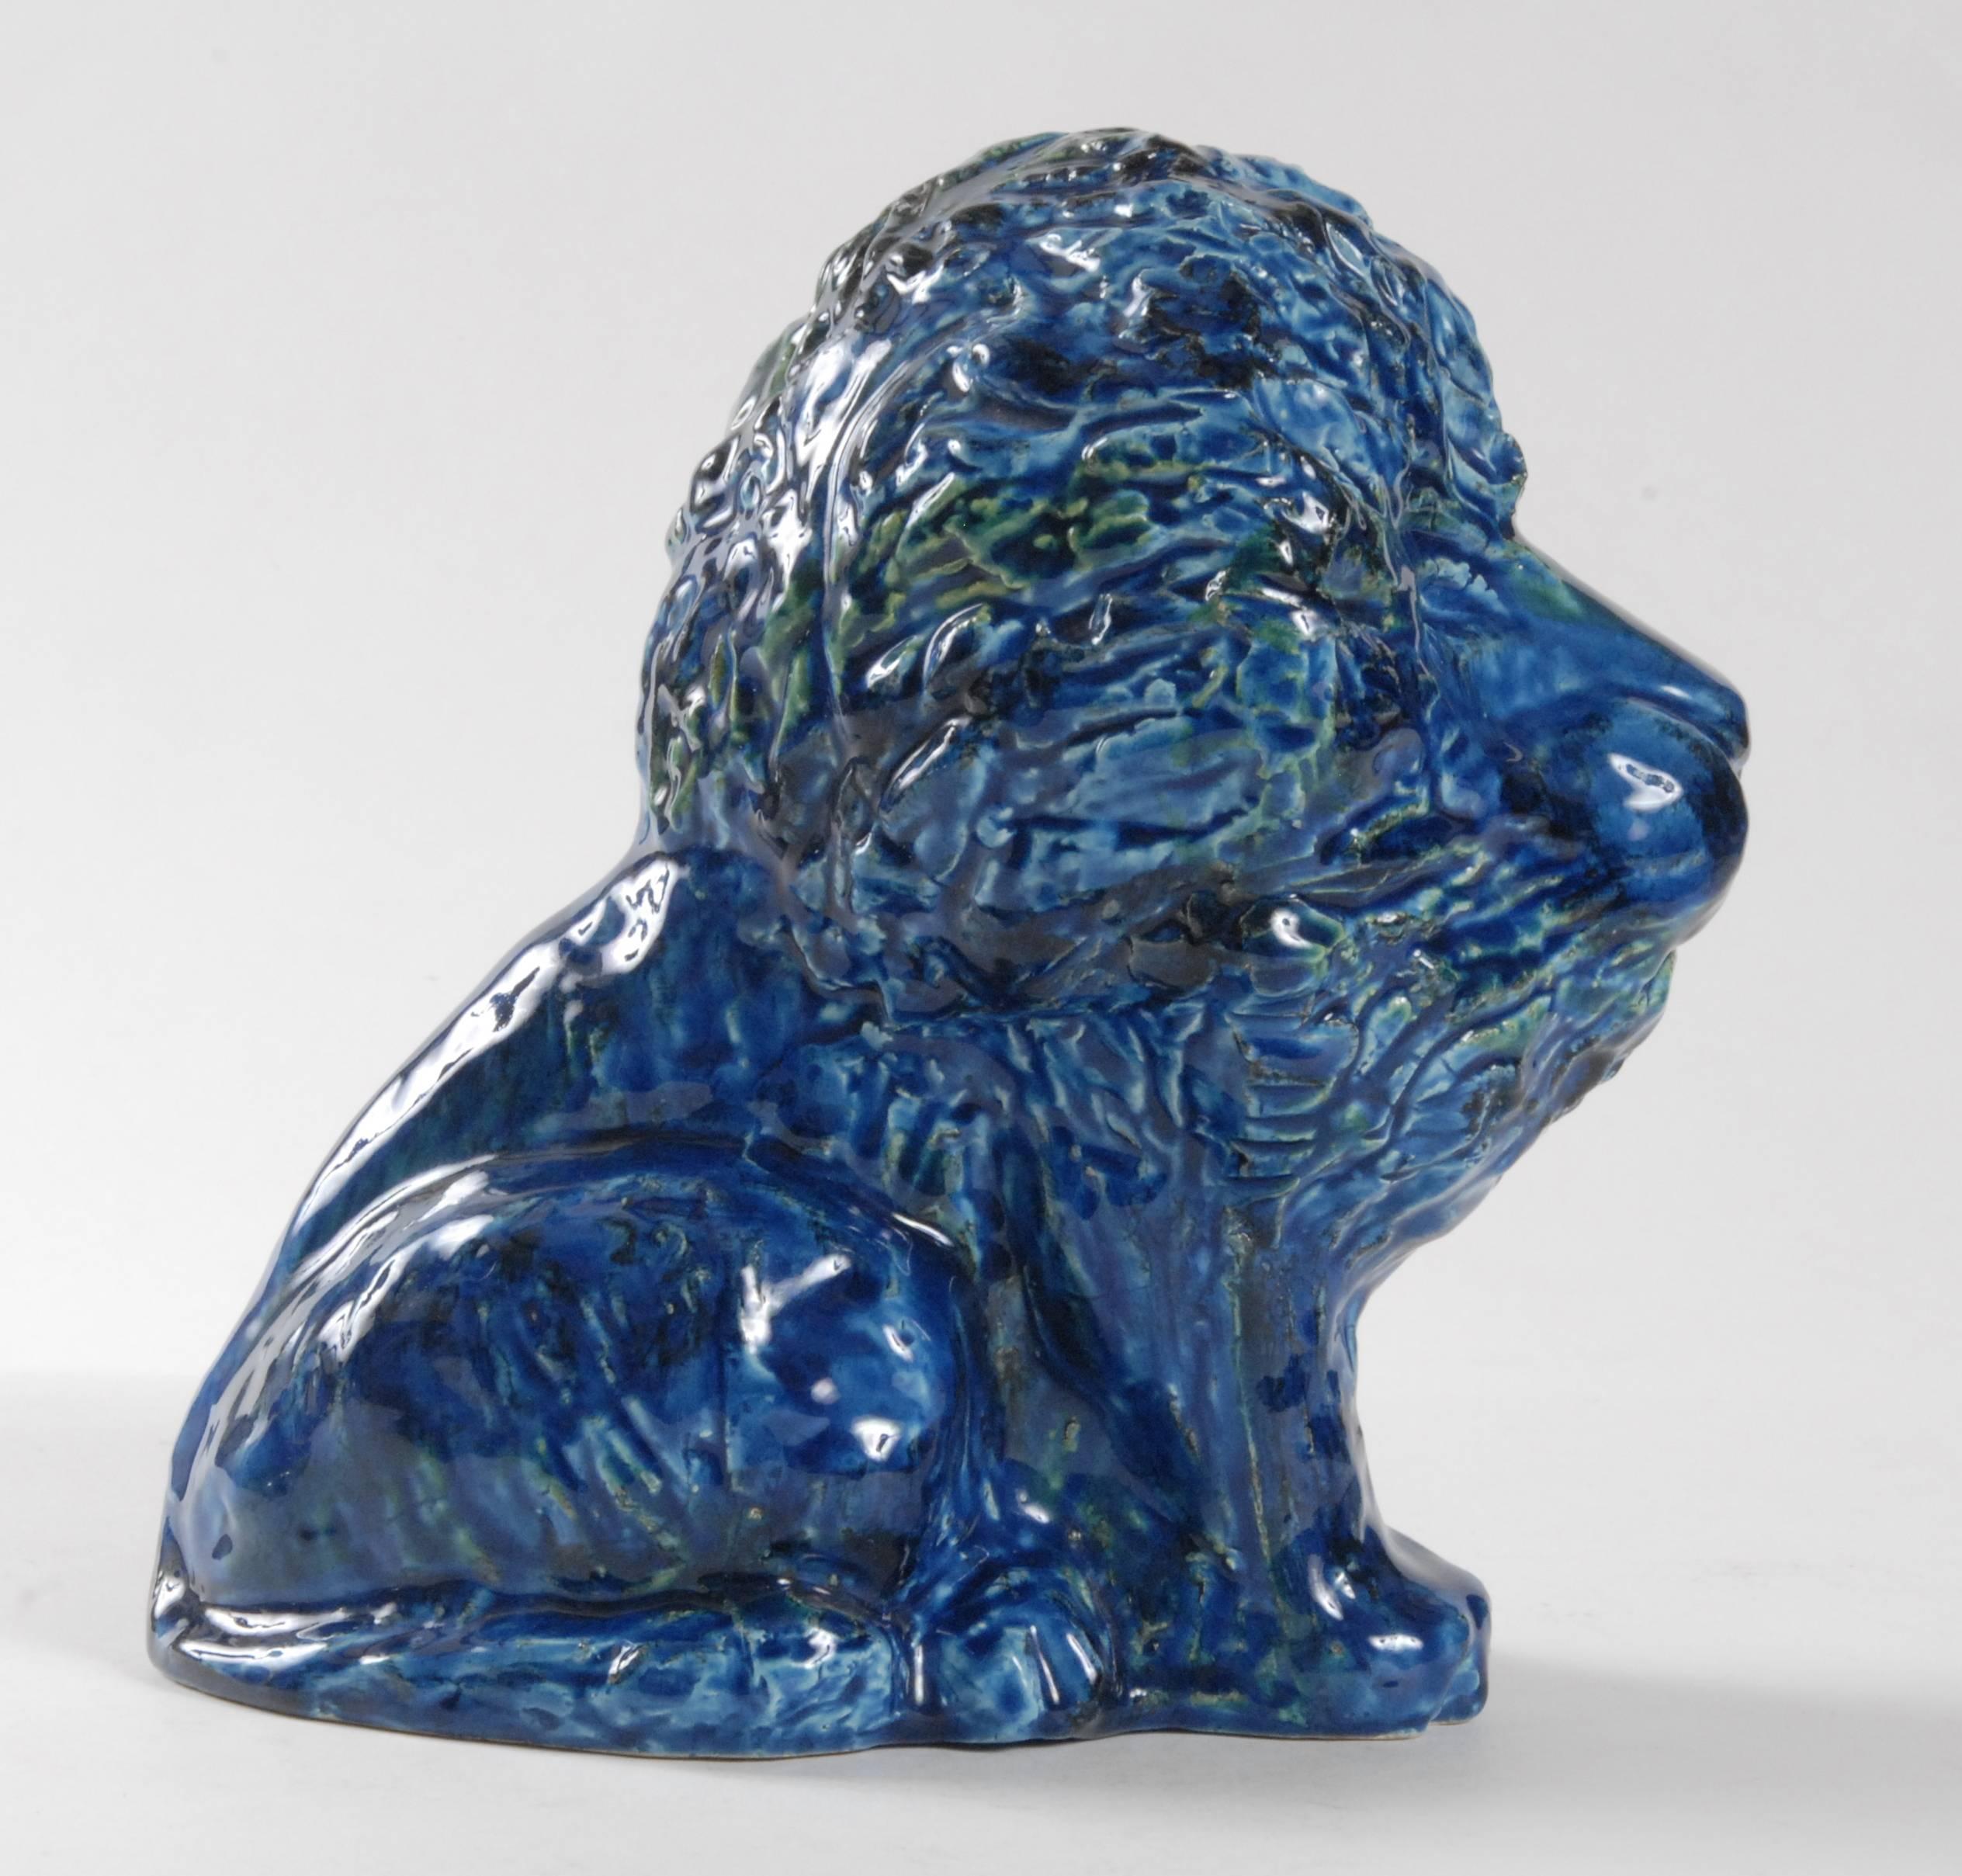 A large sitting lion designed by Aldo Londi for Bitossi in circa 1965. Very expressive, contented animal in a brilliant blue glaze.